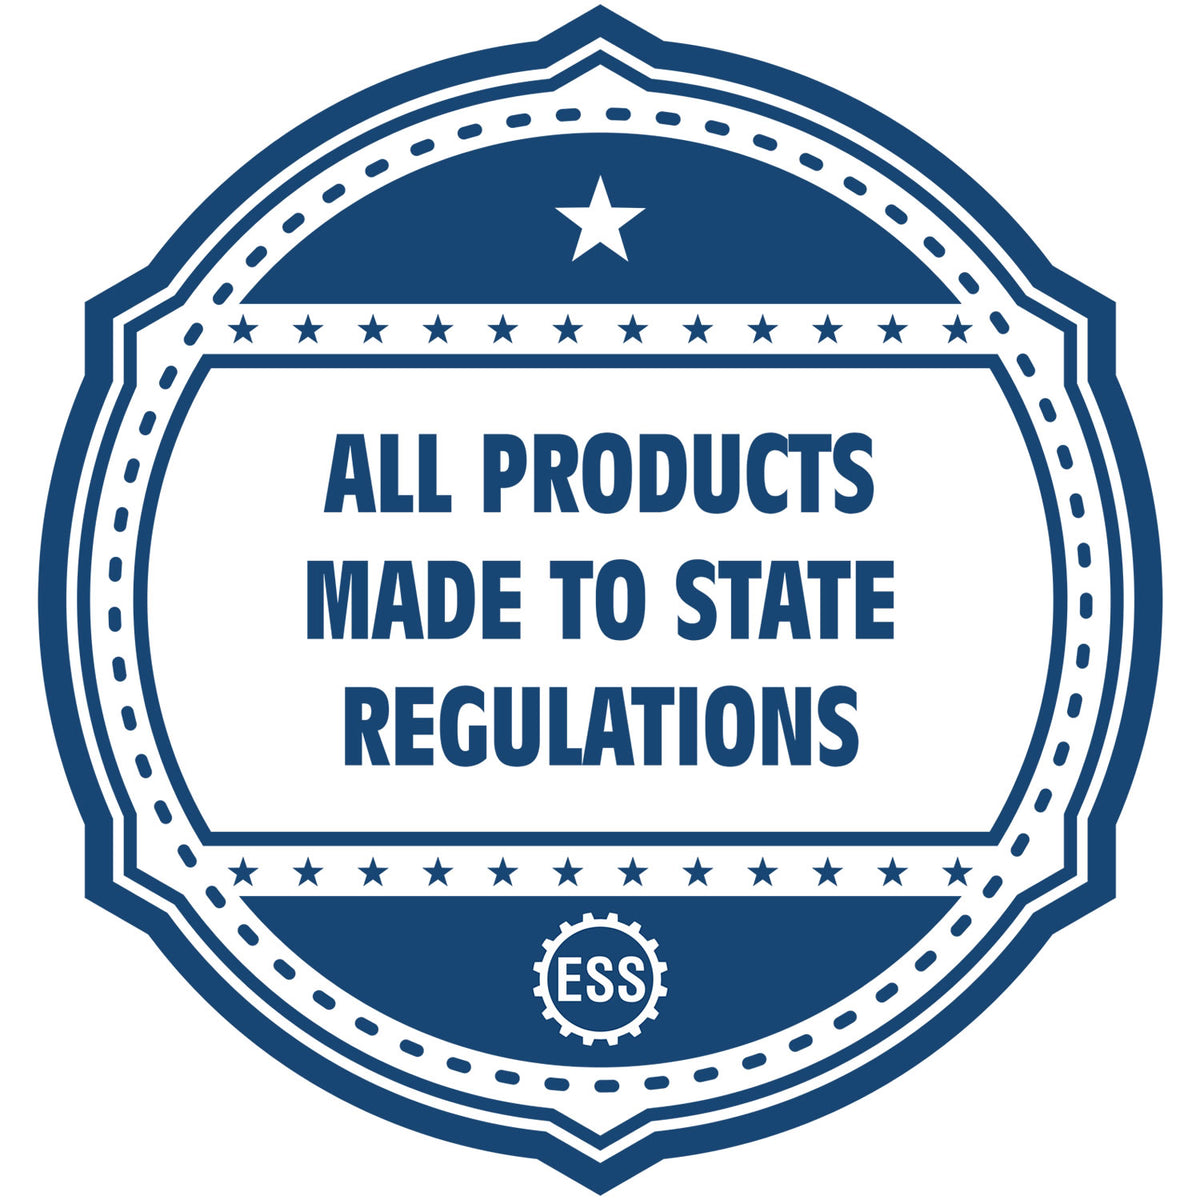 An icon or badge element for the Long Reach South Dakota PE Seal showing that this product is made in compliance with state regulations.